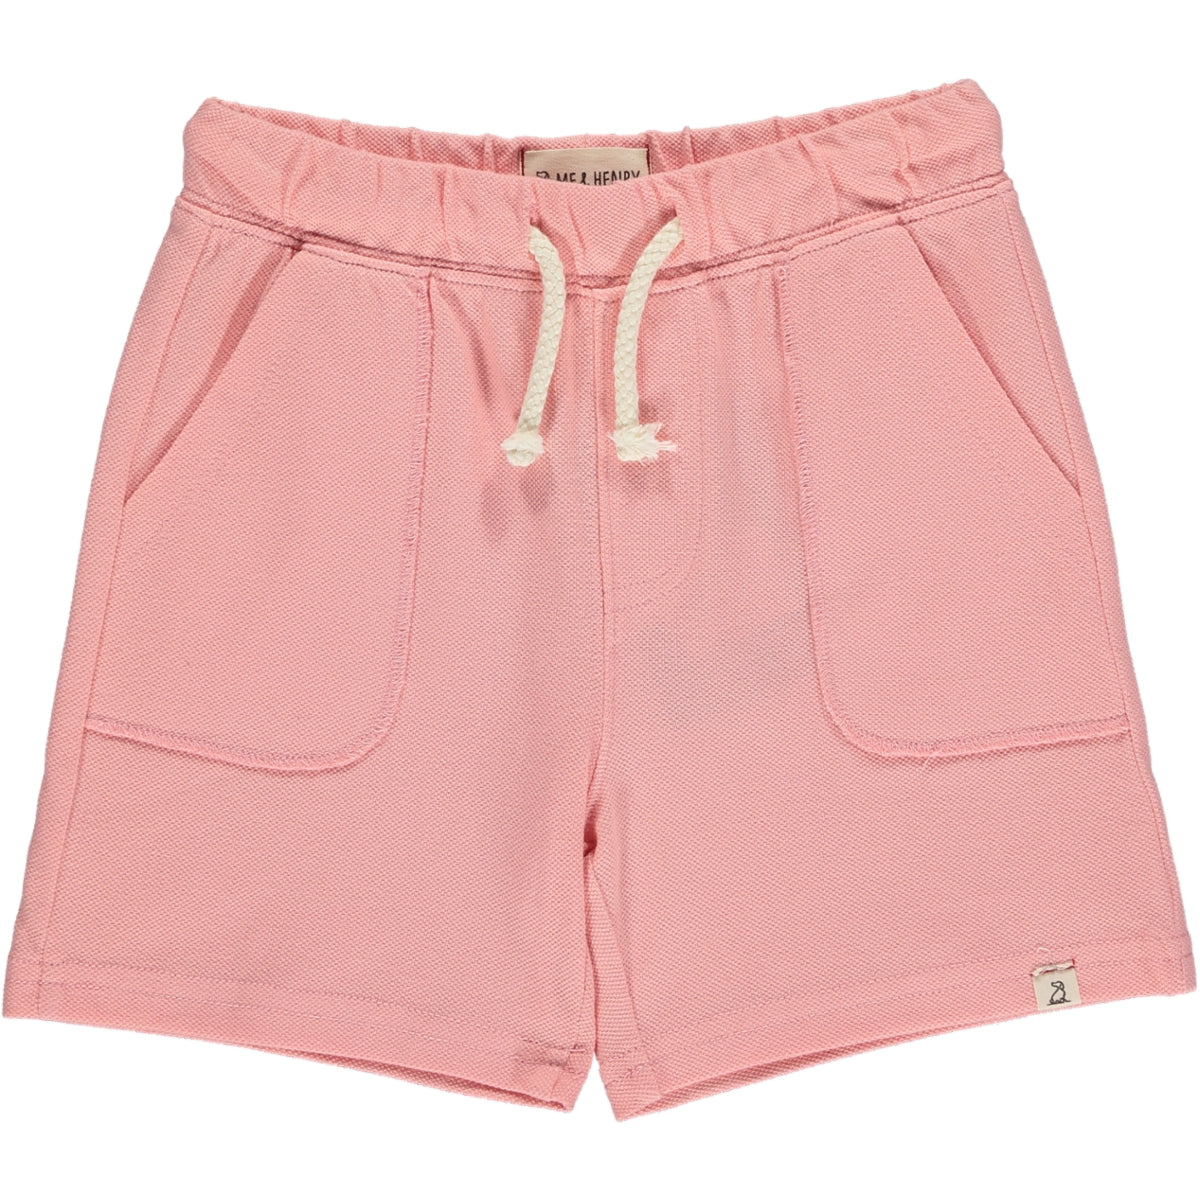 Me & Henry Timothy Pink Pique Shorts